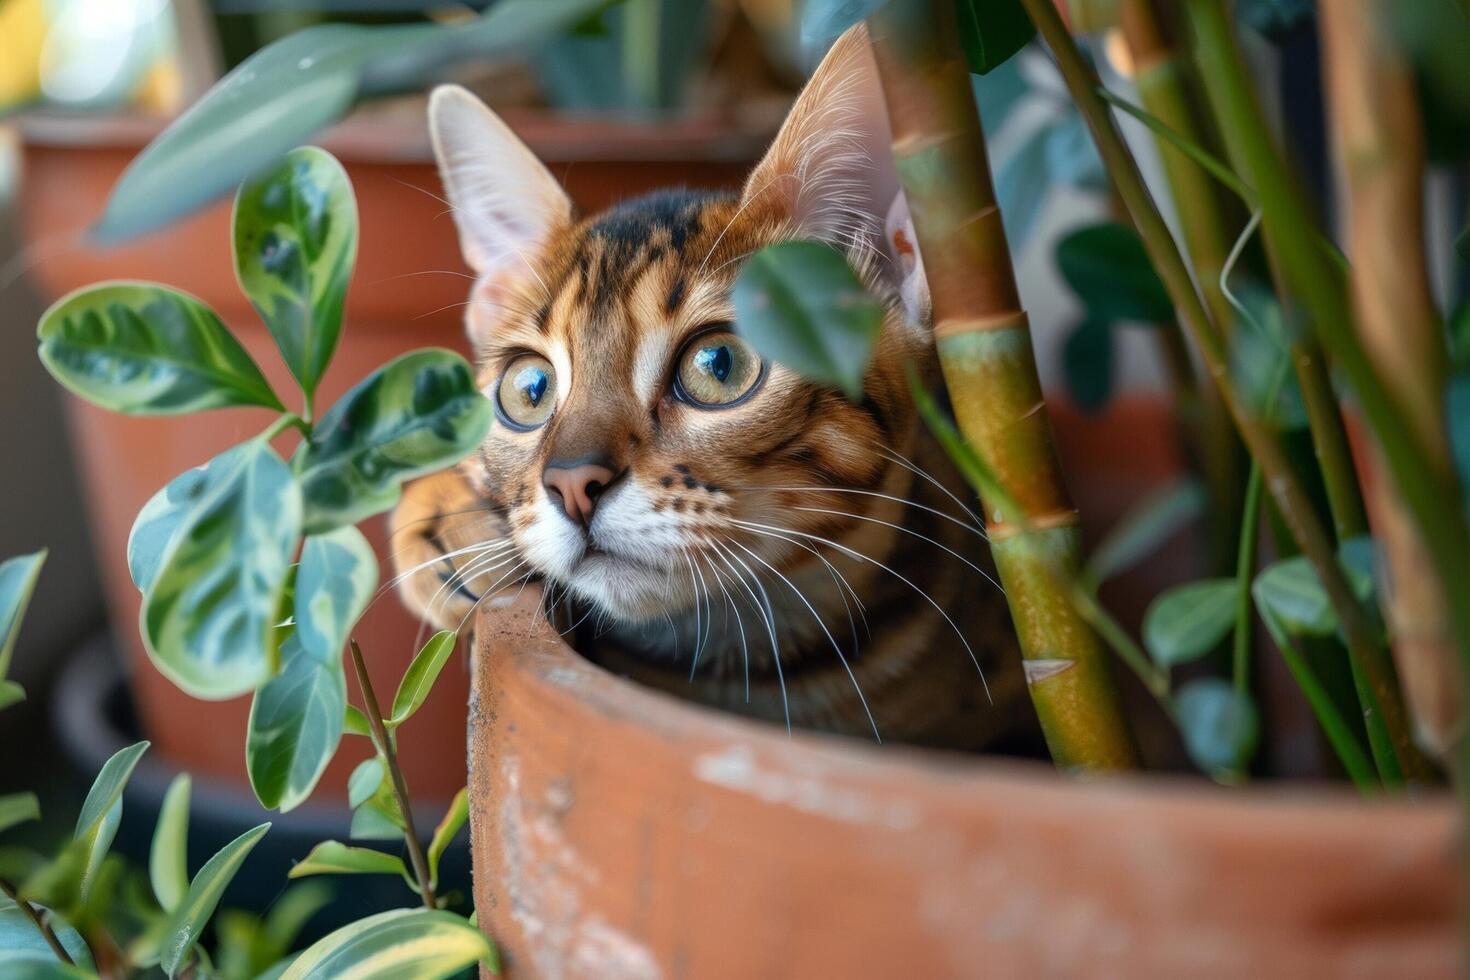 A curious Bengal cat peering out from behind a potted plant, its distinctive coat pattern catching the eye photo